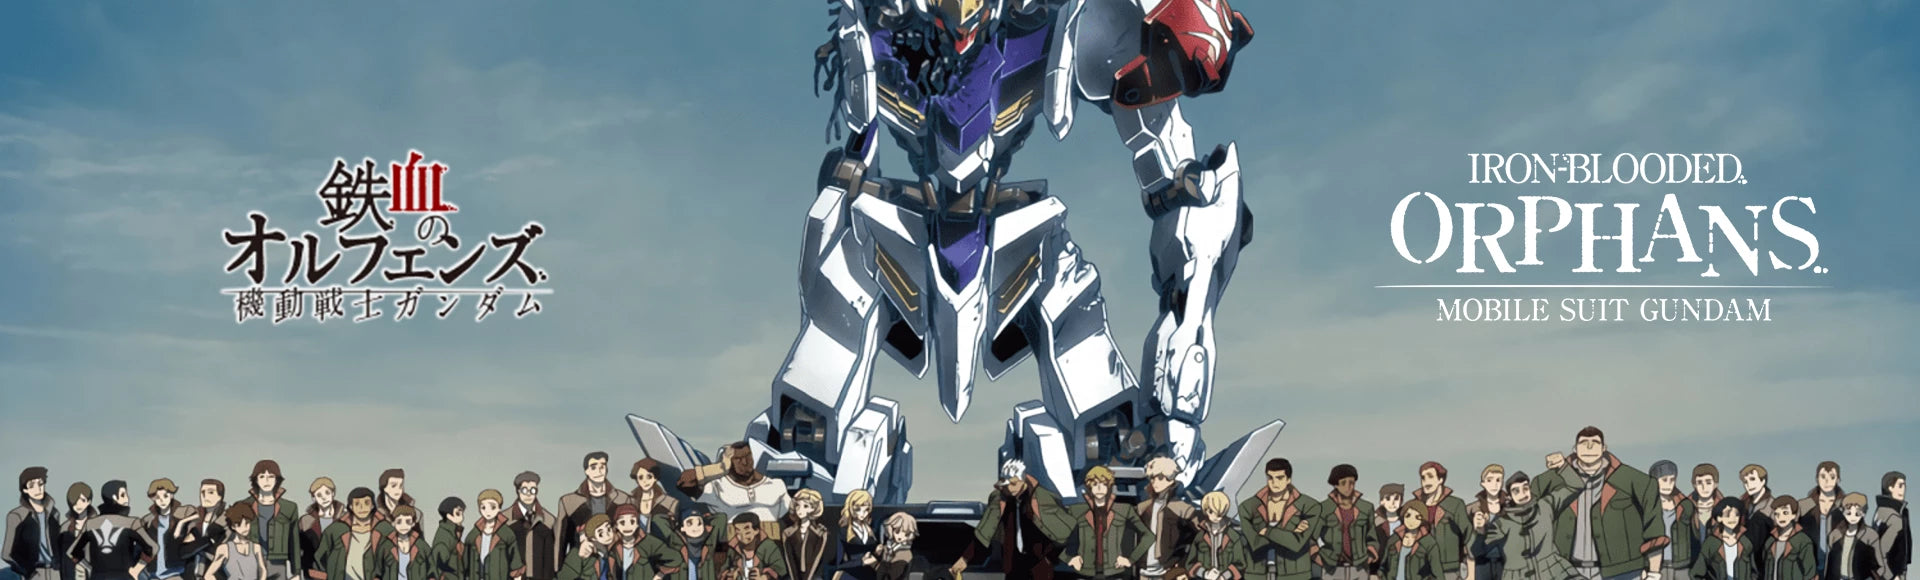 Mobile Suit Gundam IRON-BLOODED ORPHANS